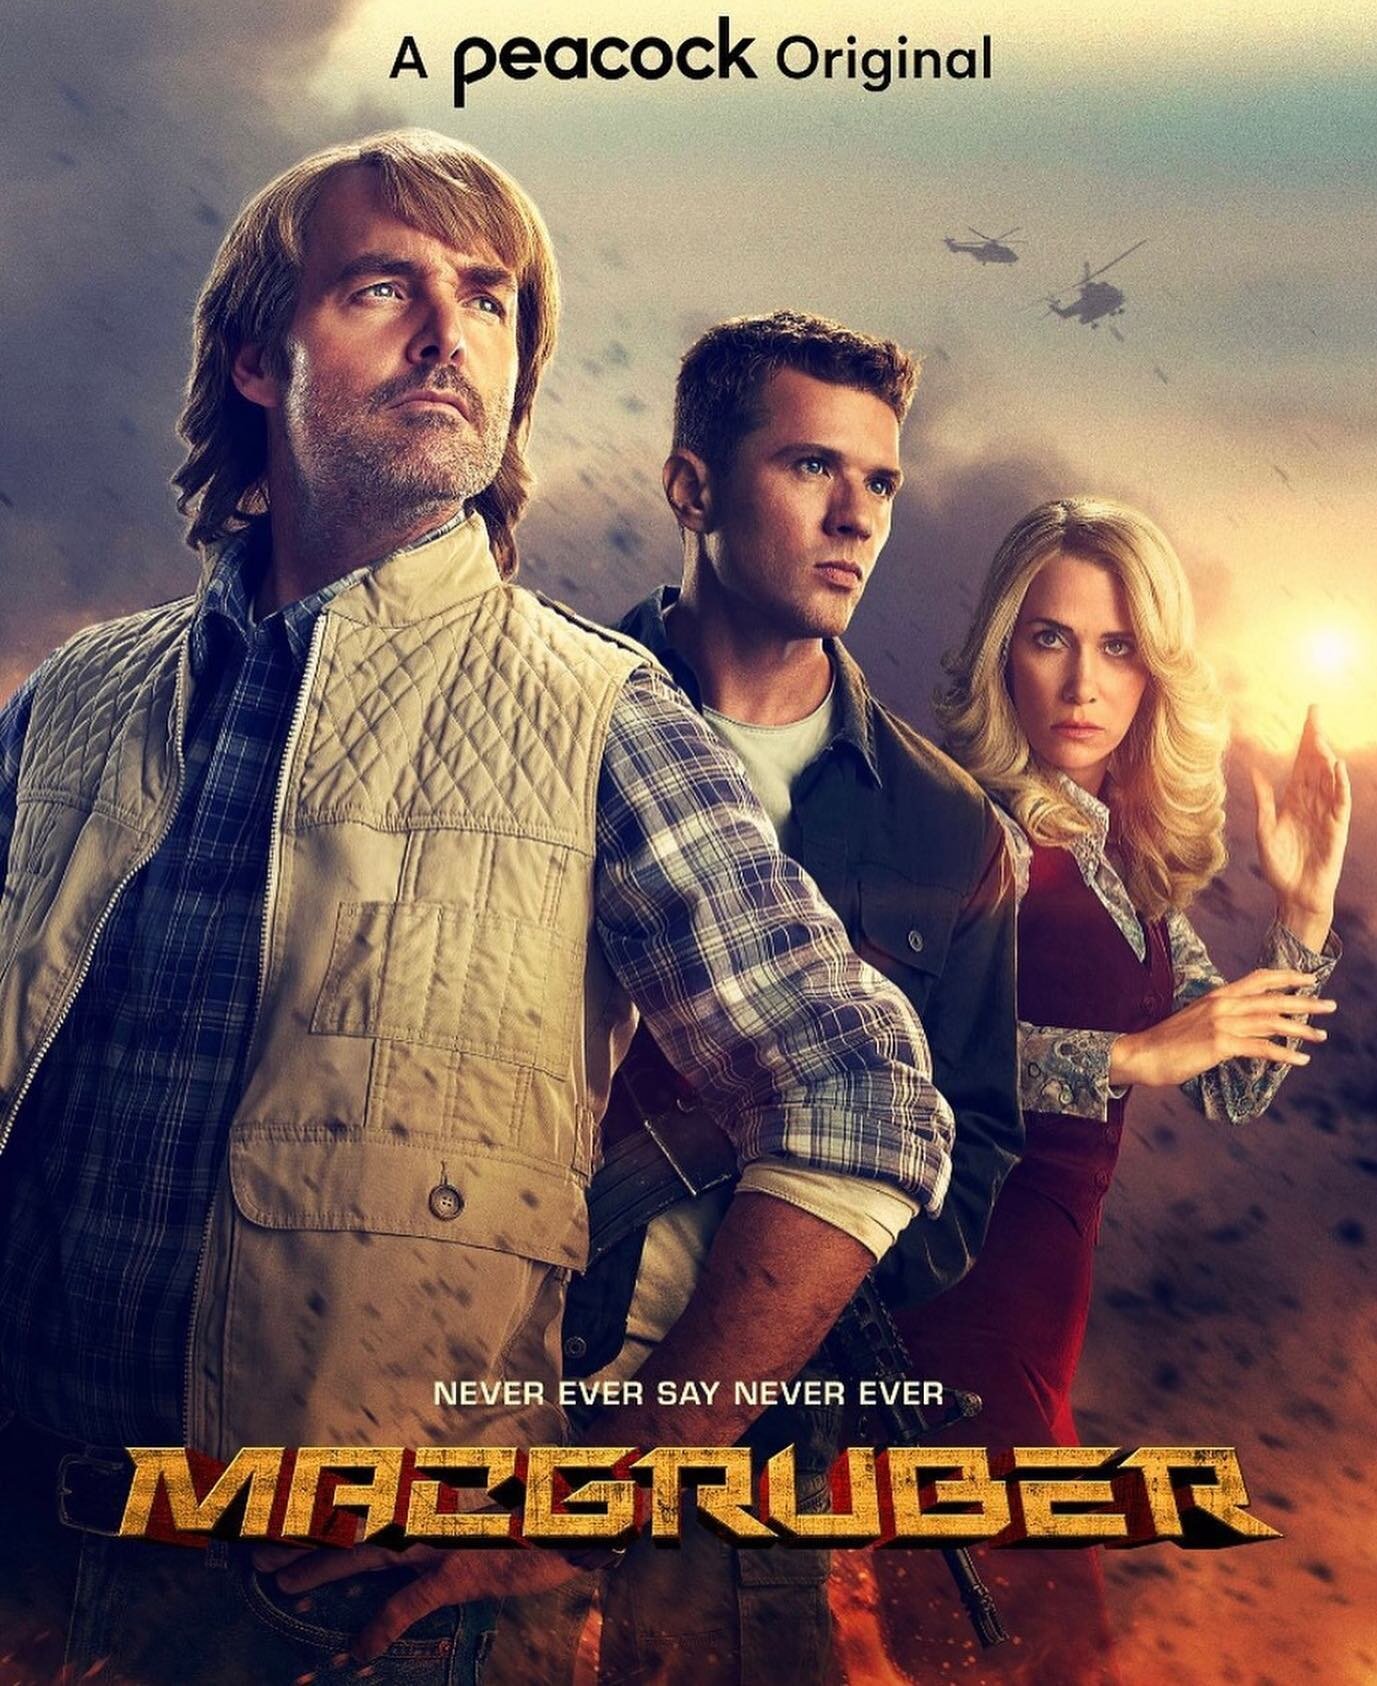 Coming December 16 on @peacocktv no words to describe how much fun we had on this one!! #macgruber @ryanphillippe @kristenwiigdaily @willismyforte @jormataccone